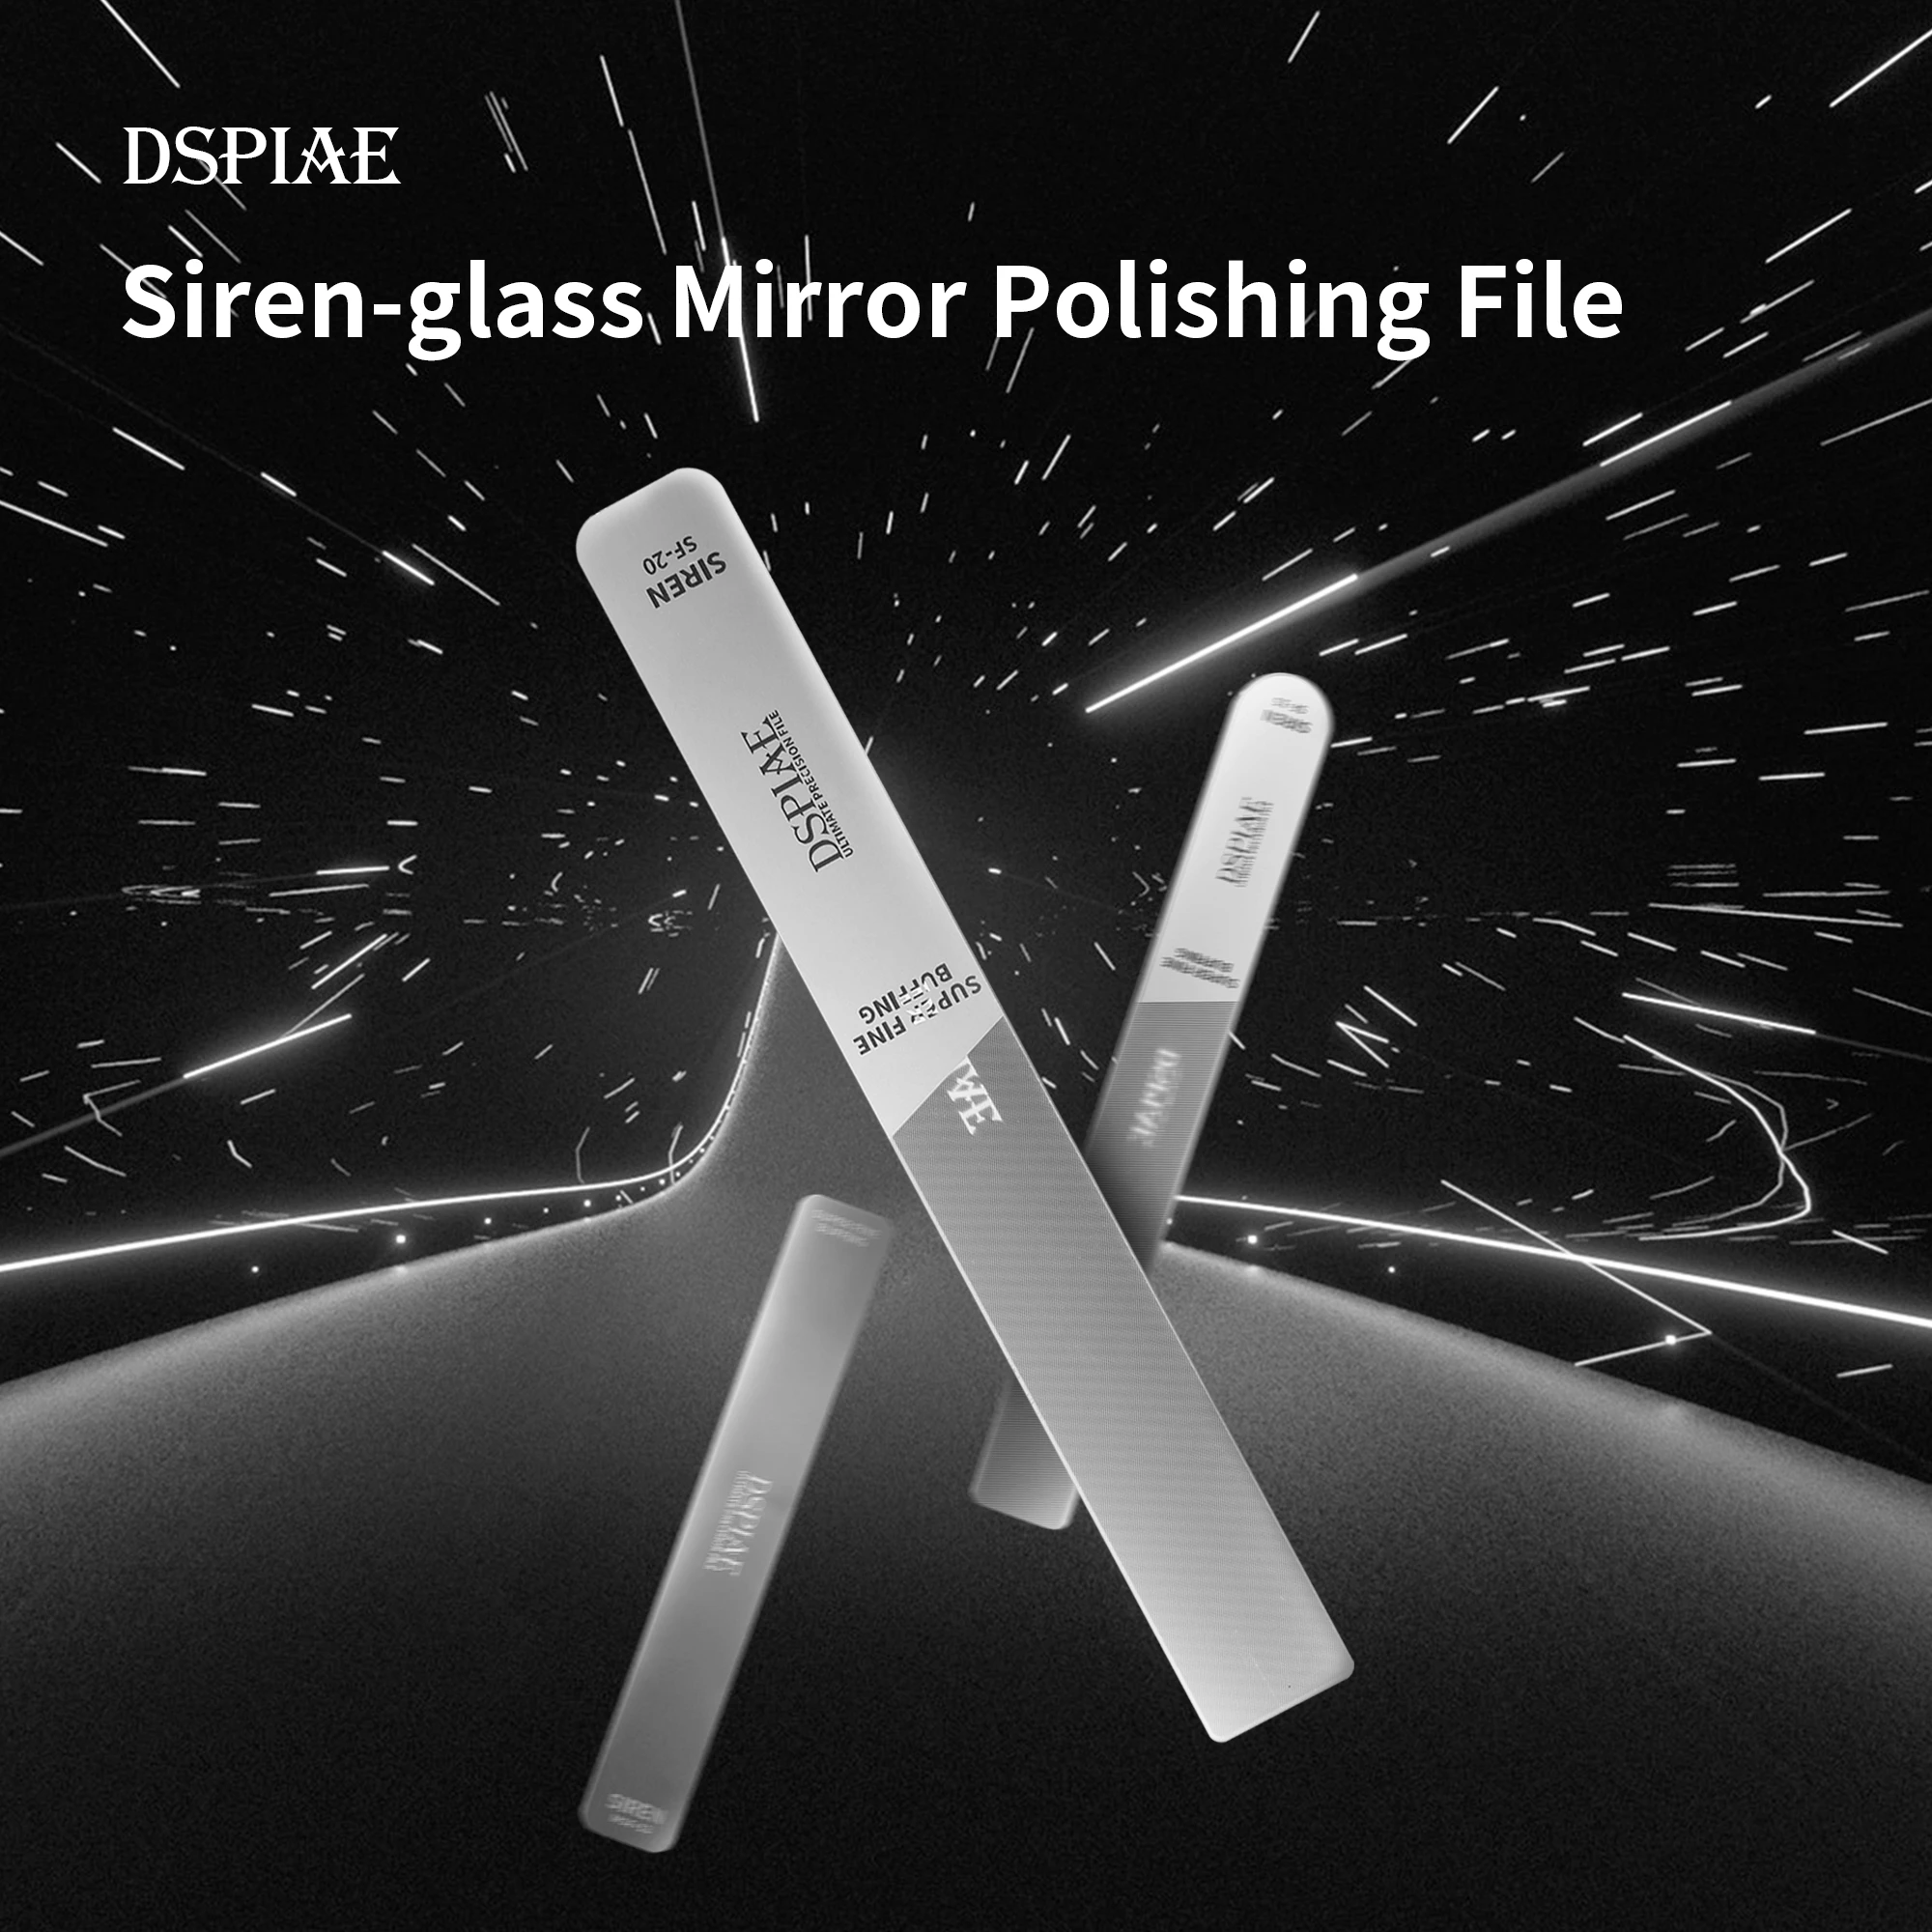 DSPIAE  SF-20/SF-15/MSF-13 Siren Ultimate Precision File Model Assembly Tool Hobby Accessory